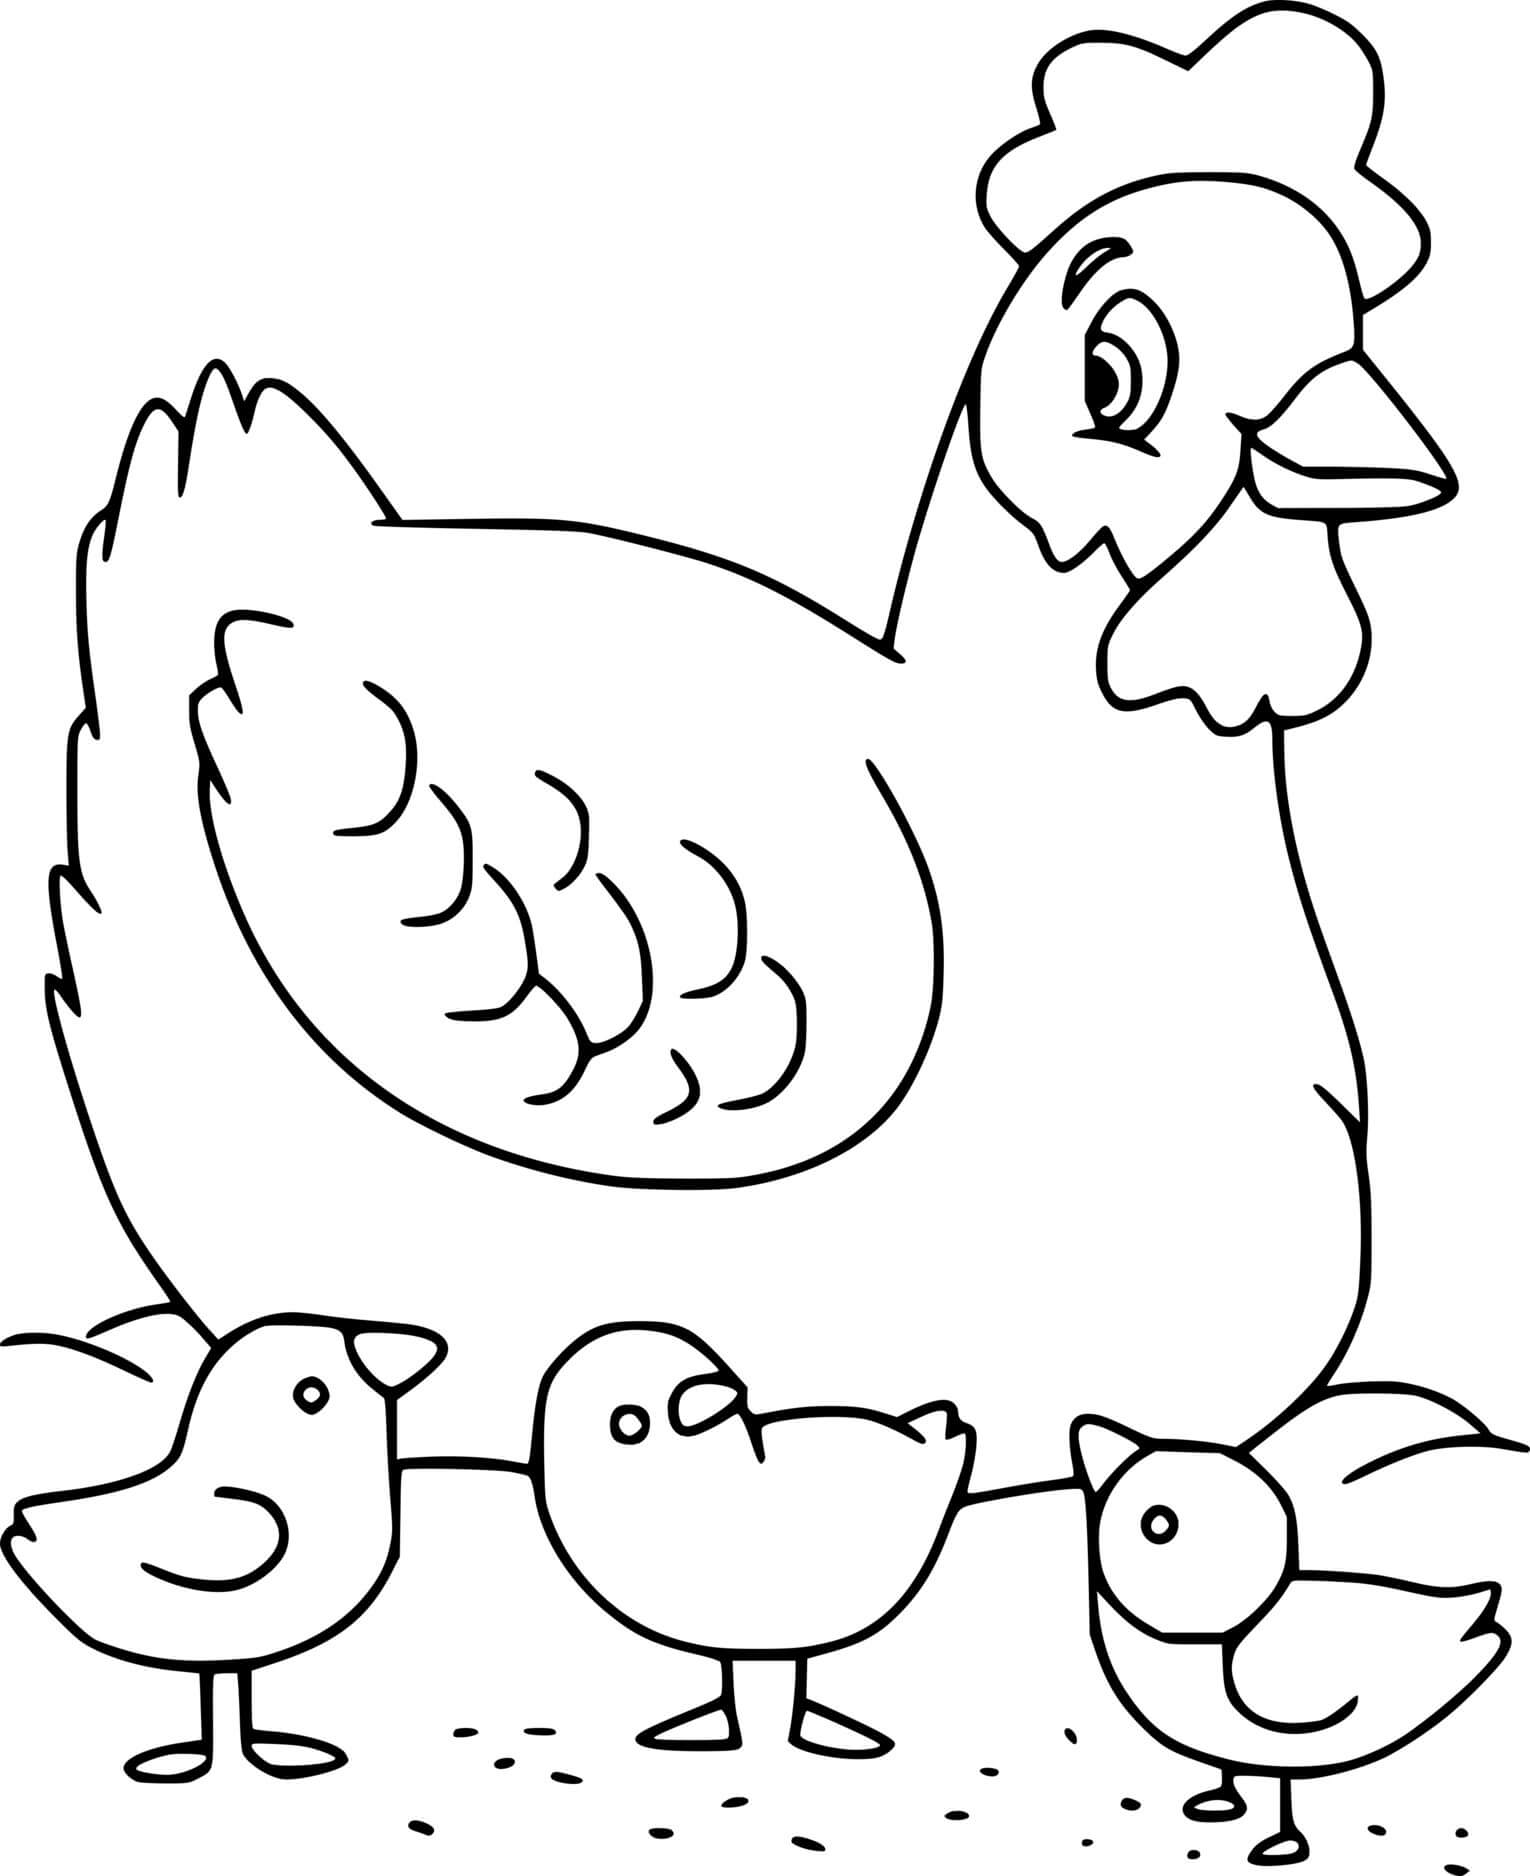 Easy Hen And Three Chicks Coloring Page